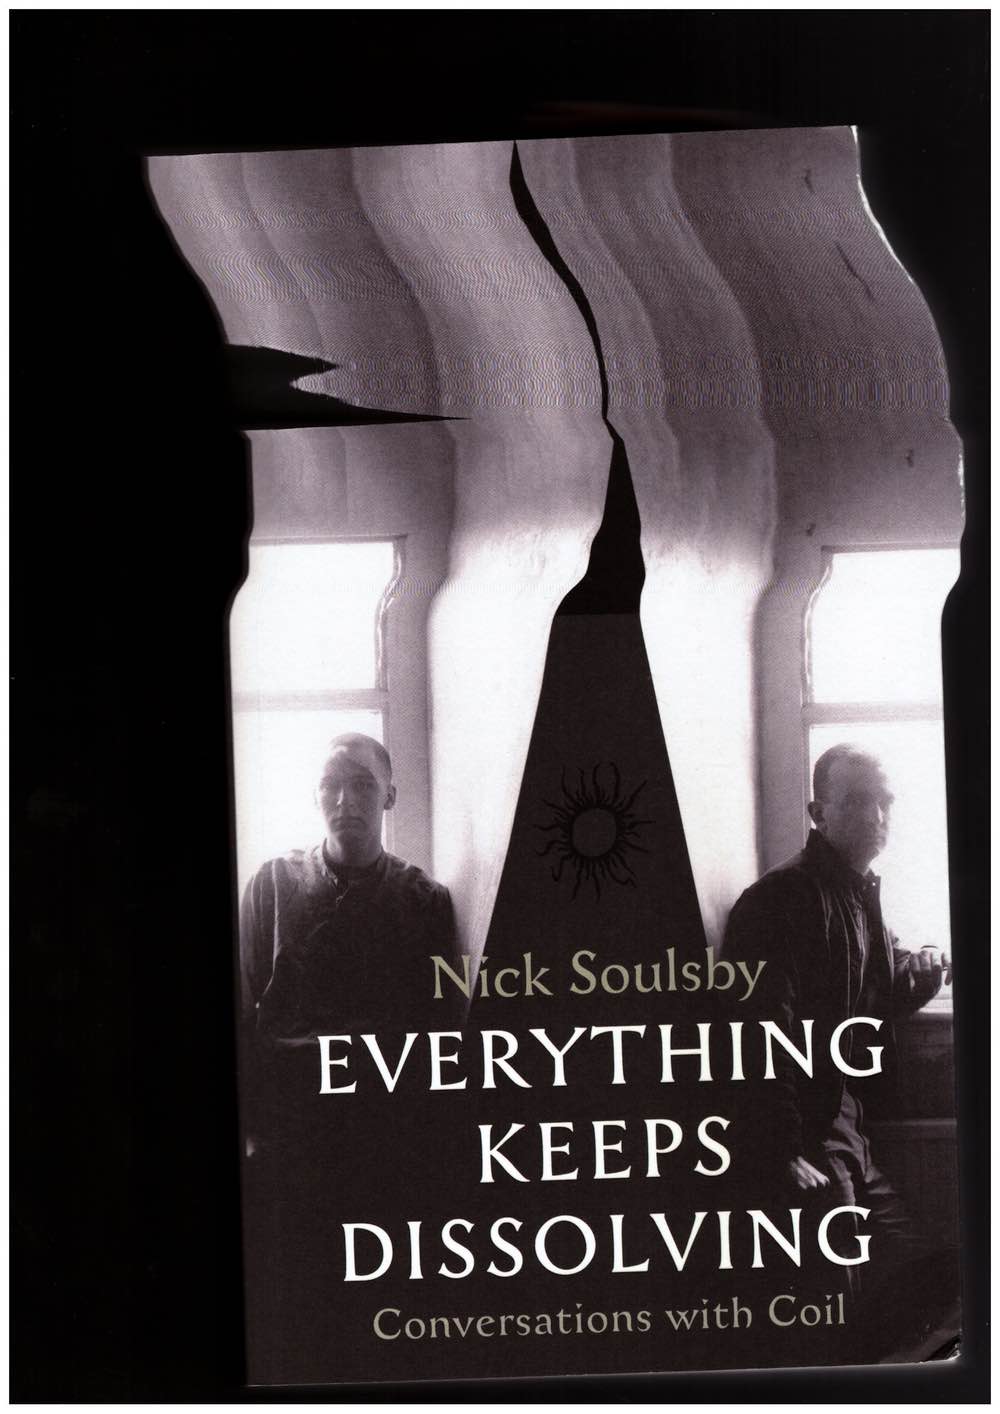 COIL; SOULSBY, Nick (ed.) - Everything Keeps Dissolving. Conversations with Coil